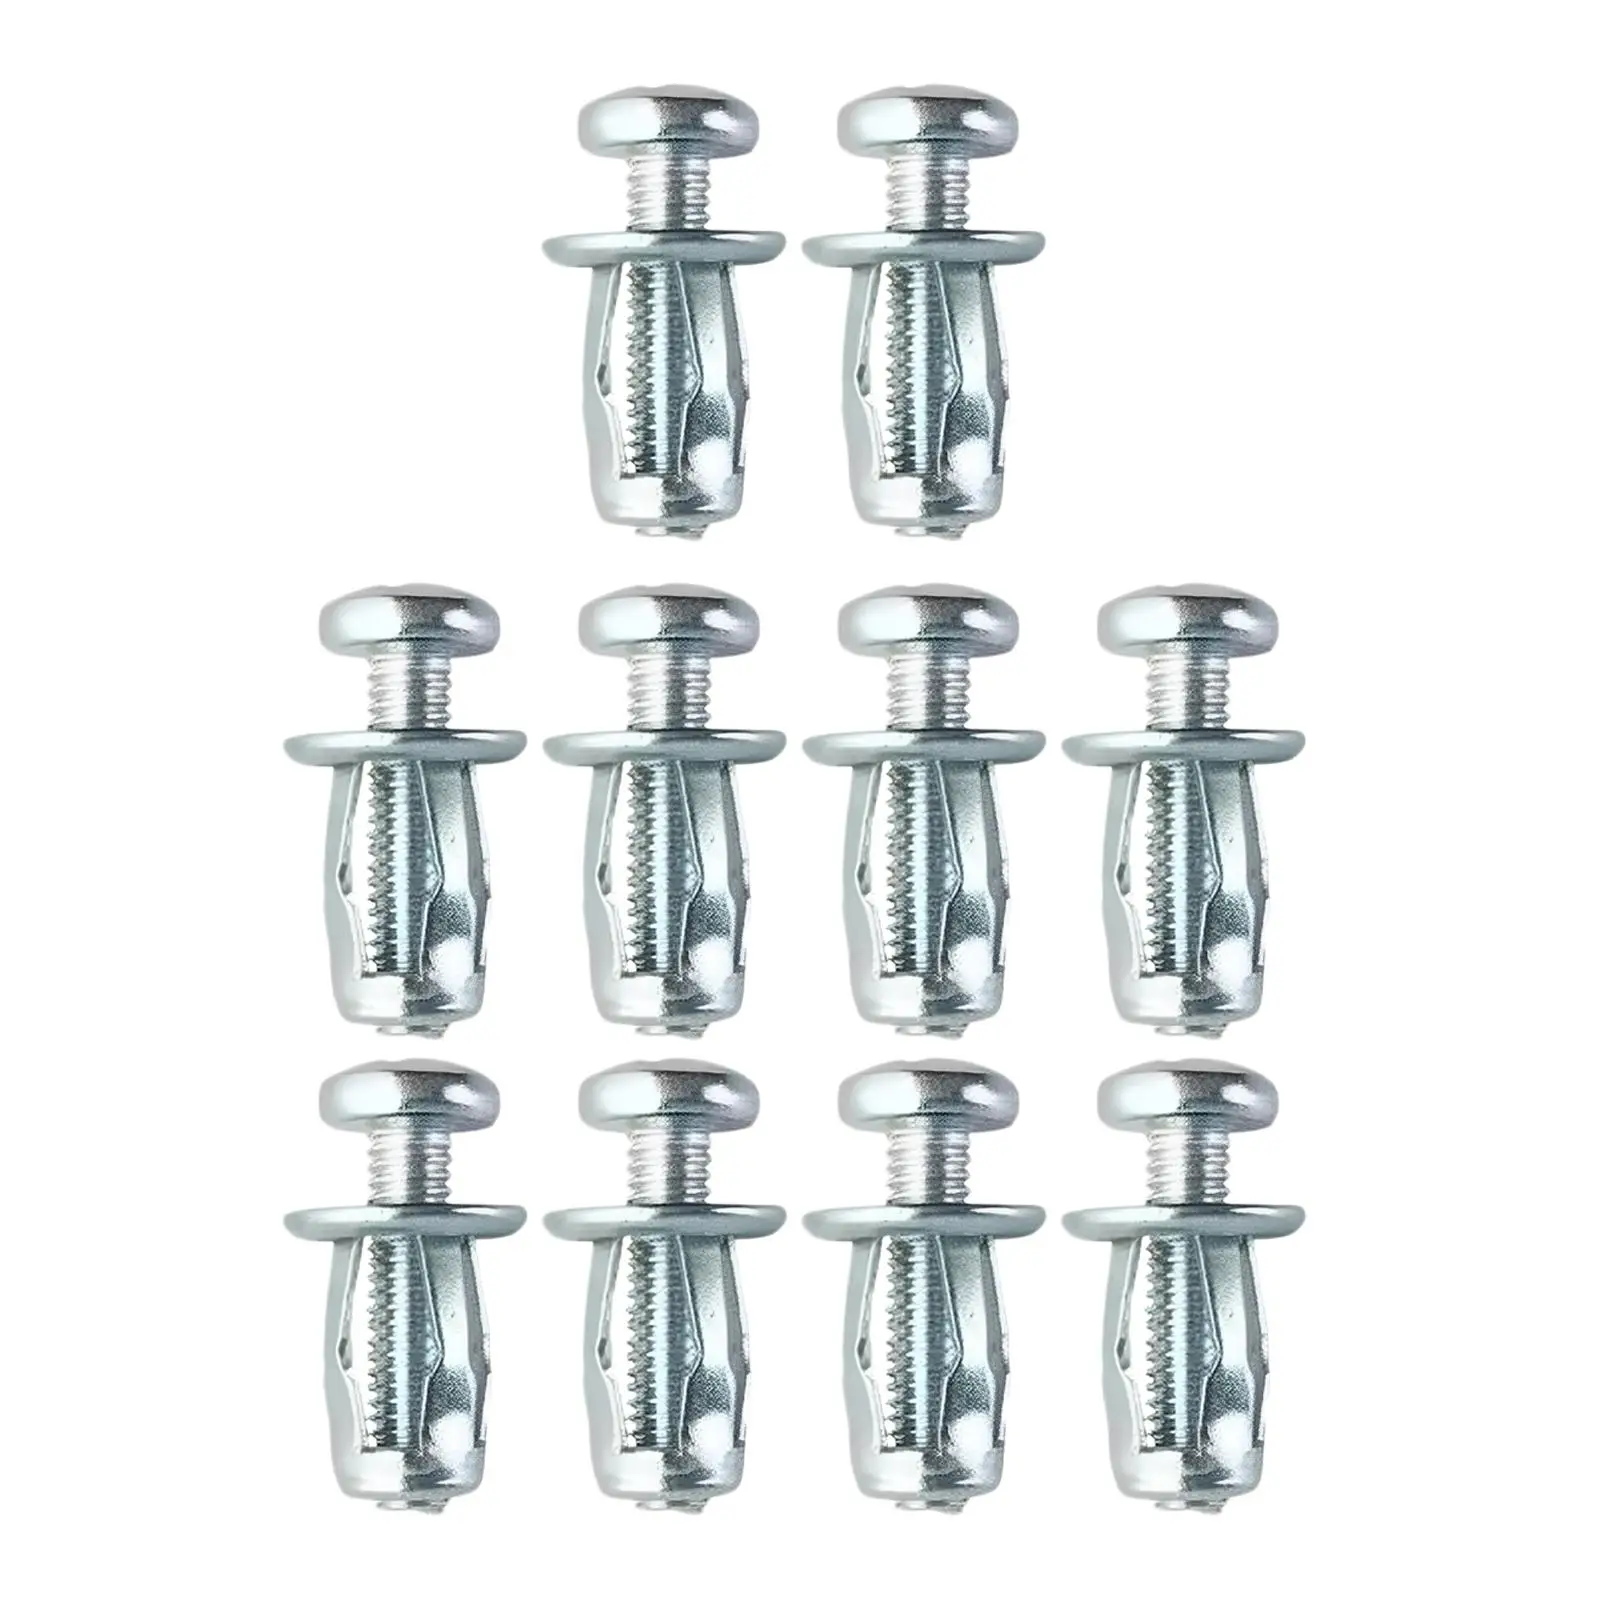 10x Petal Expansion Nut Expansion for Gypsum Board Fixing Picture Curtain Installation Cabinet Decoration Lamp Installation